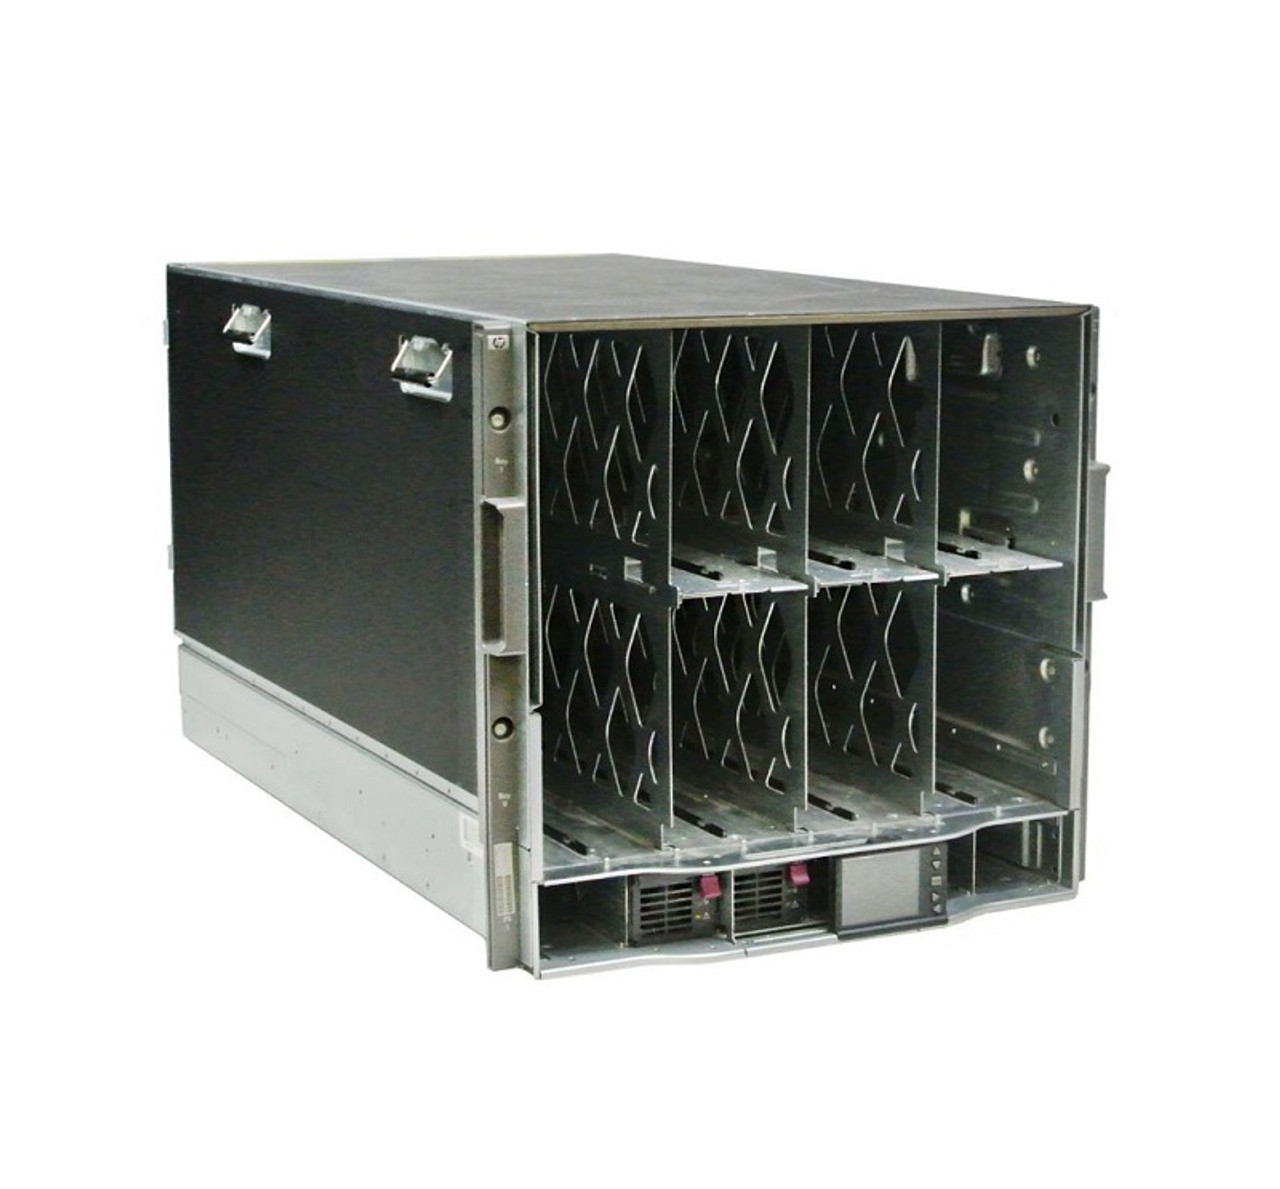 K2R81A - HP Modular Smart Array 2040 SFF Chassis - Storage Enclosure